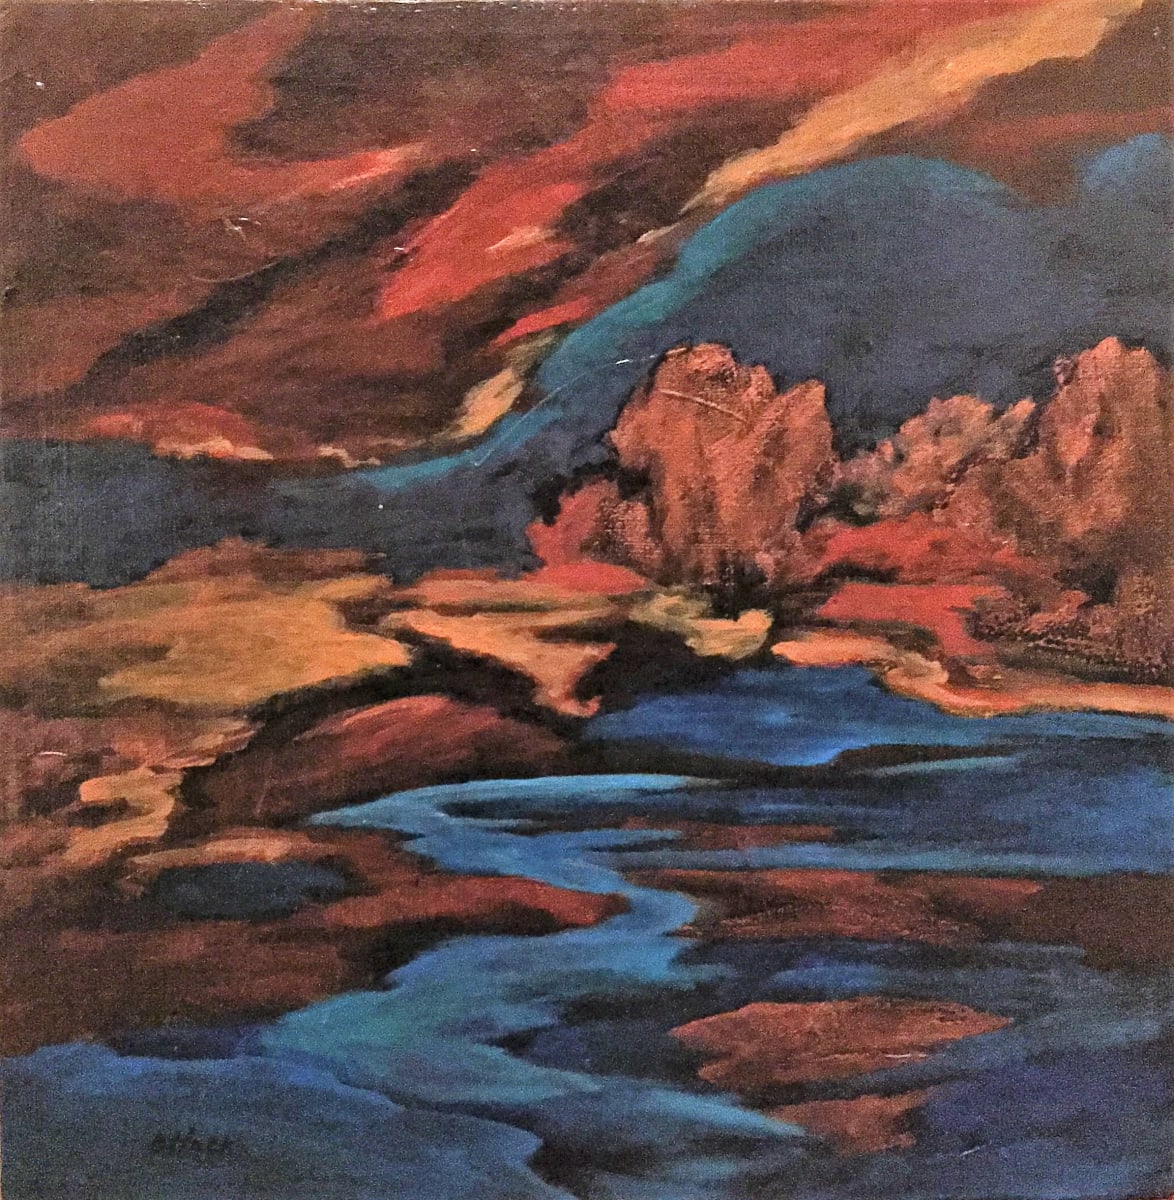 "Copper Tones" by Betty Hock by Betty Hock  Image: "COPPER TONES" by Betty Hock , Landscape, 12 x 12 in., Acrylic on Canvas